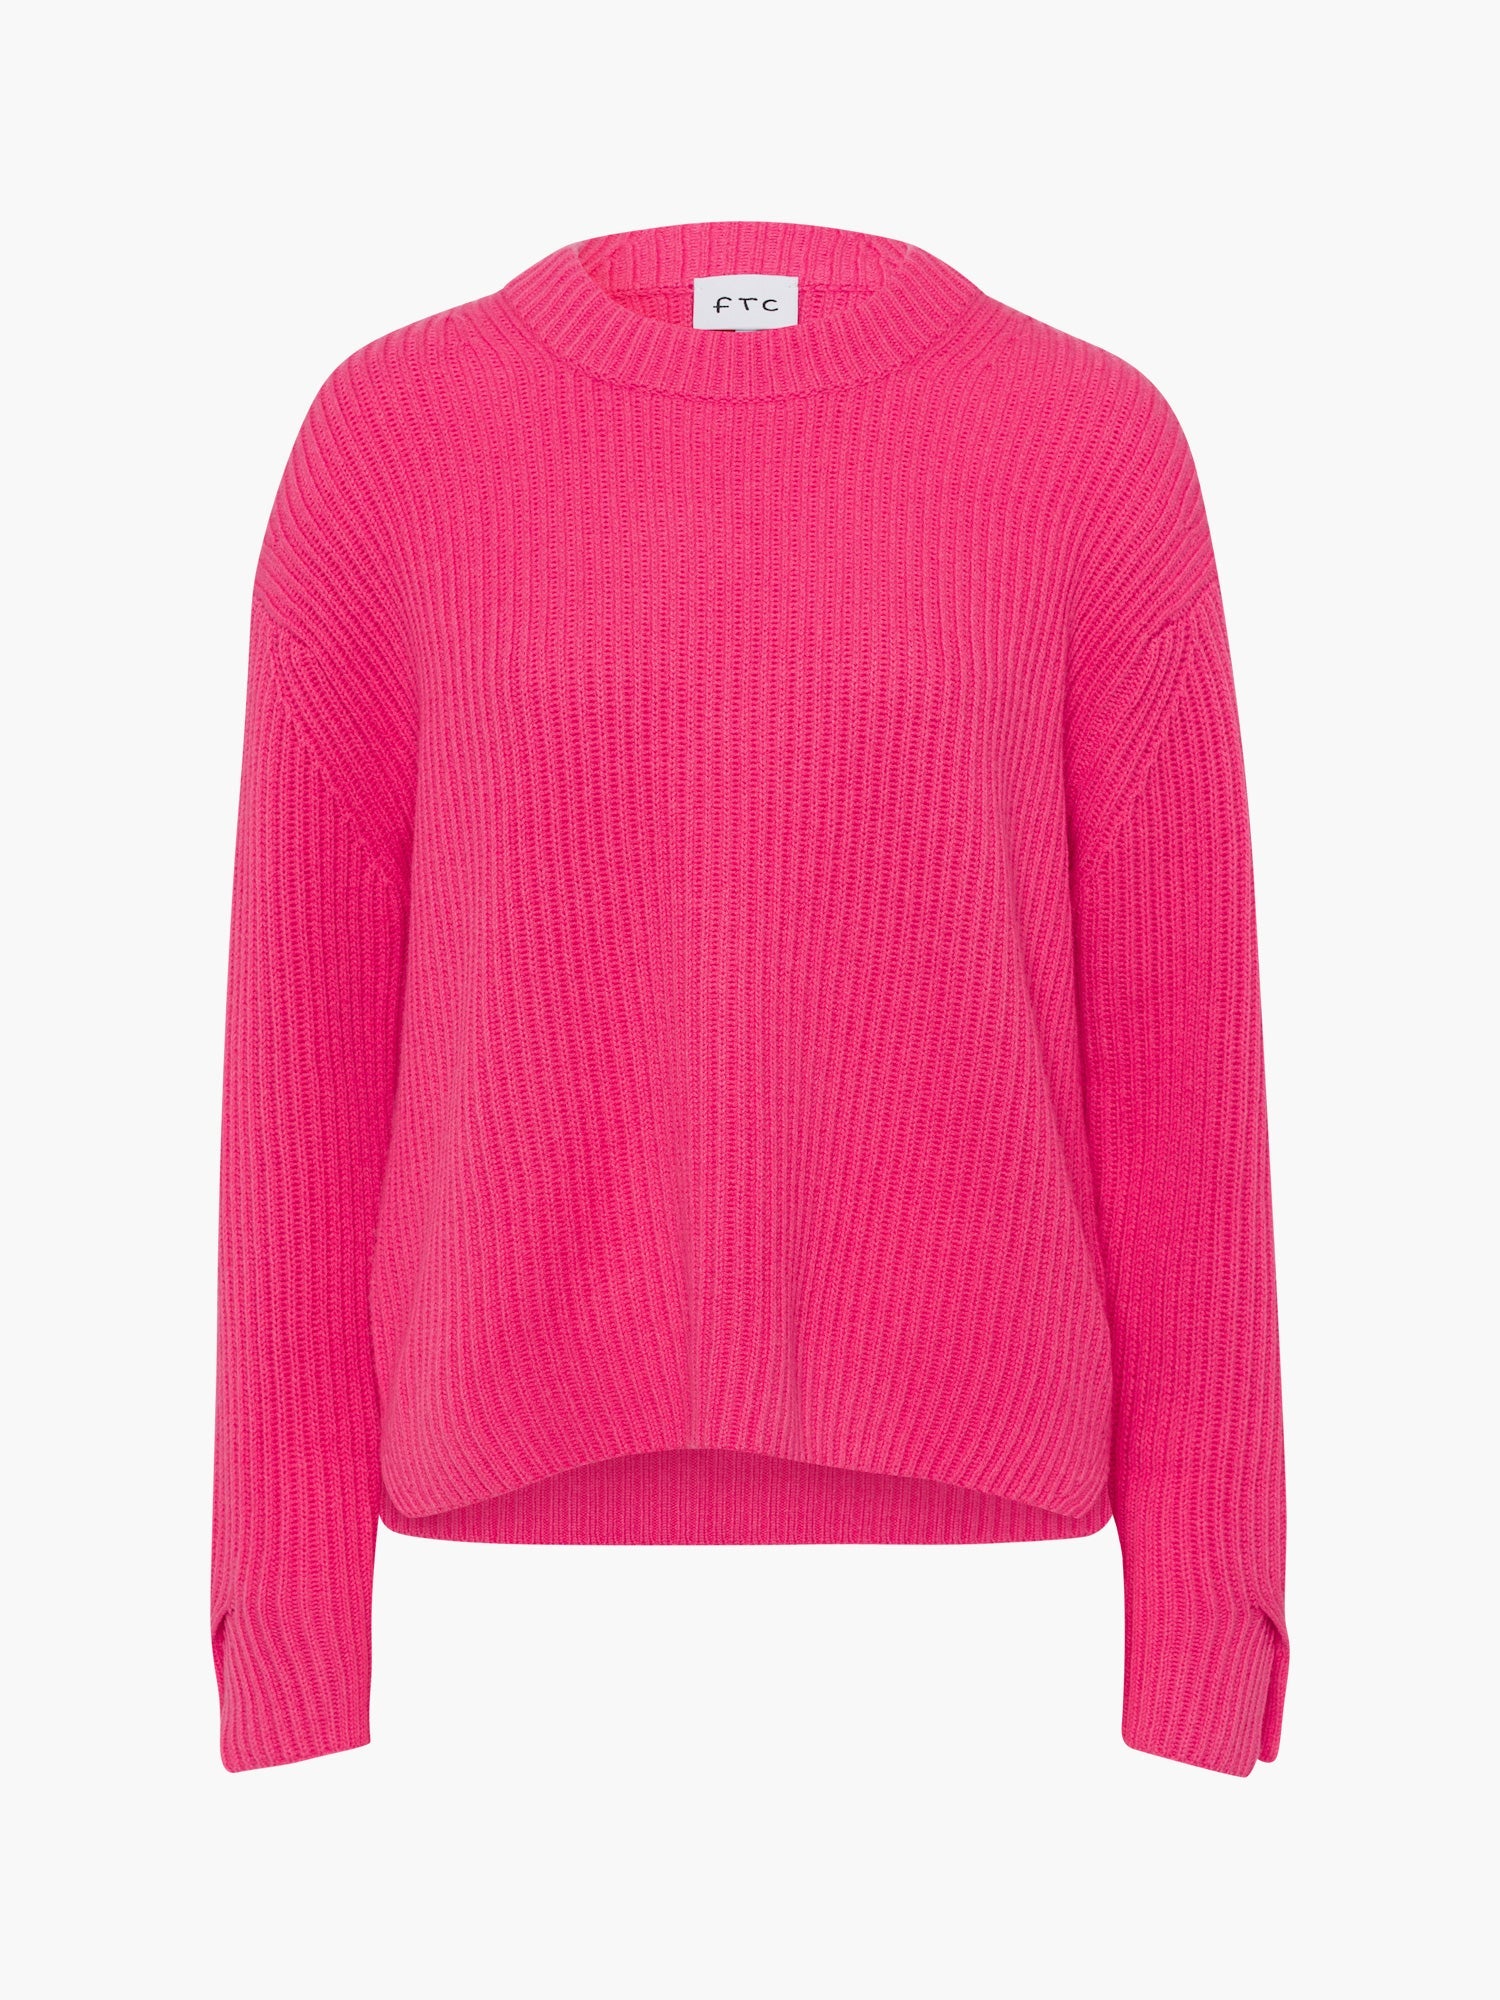 FTC-Cashmere-OUTLET-SALE-Pullover-RN-Strick-ARCHIVE-COLLECTION_dfc4a169-1dc2-4a2b-88aa-0999e402bffe.jpg